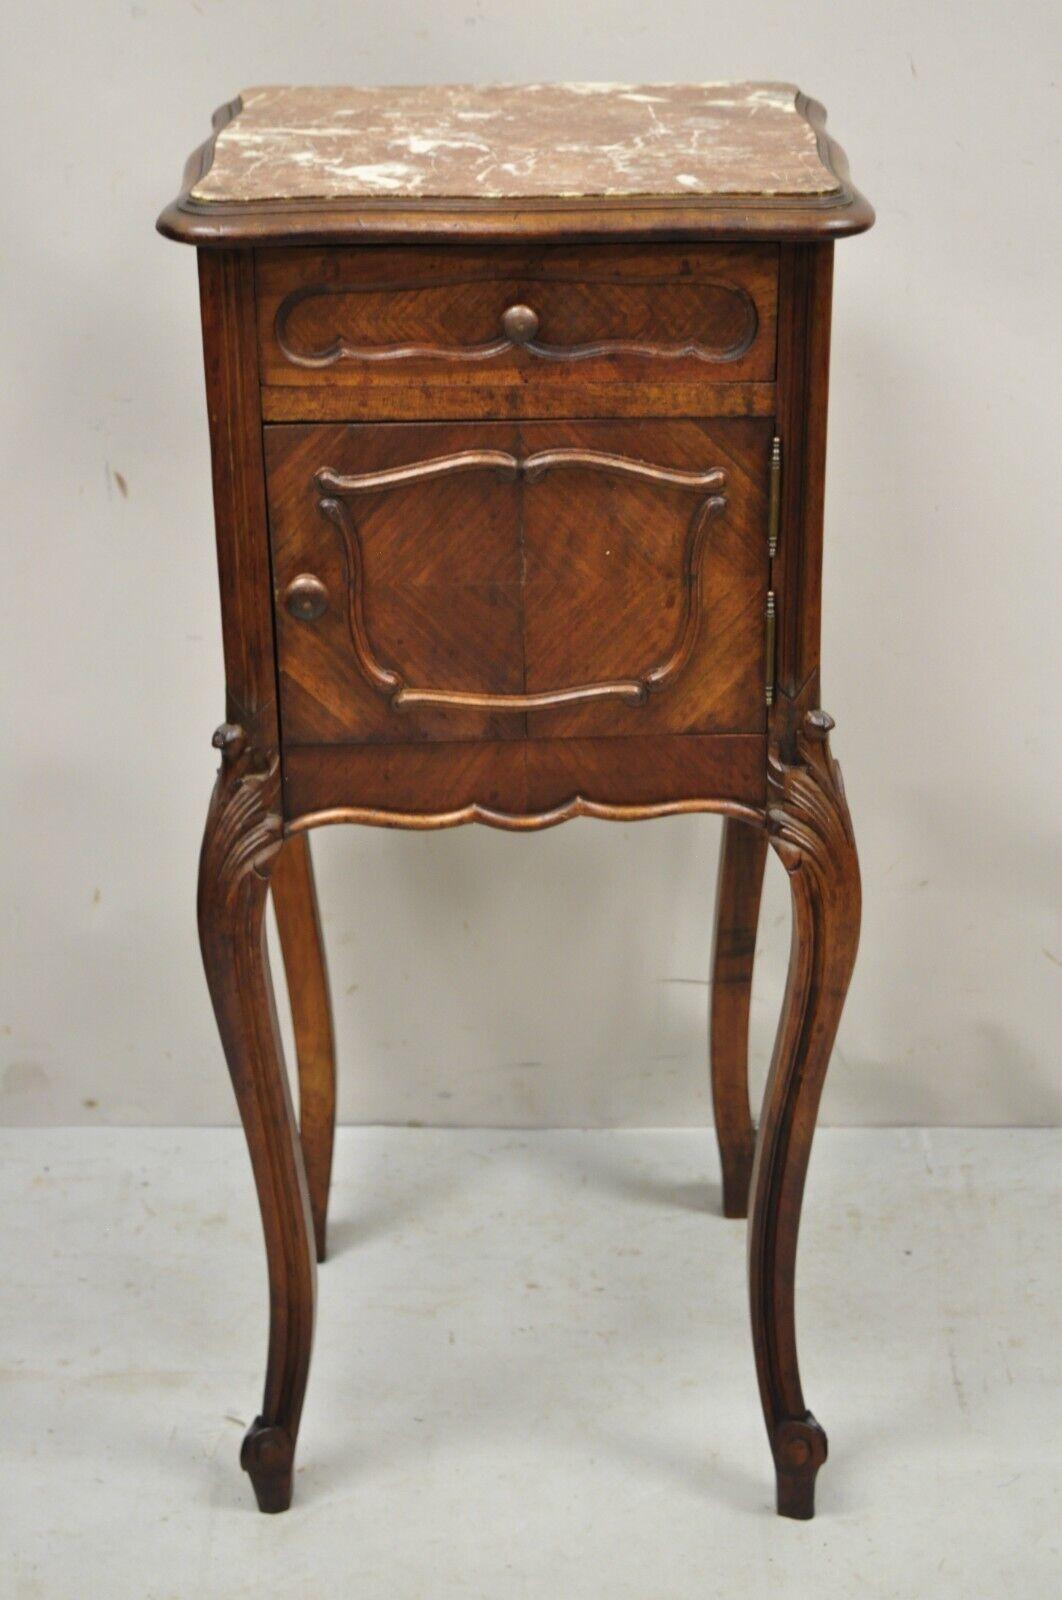 Antique French Renaissance Louis XV Style Marble Top Humidor Nightstand. Item features an inset rouge marble top, beautiful wood grain, 1 swing door, 1 dovetailed drawer, cabriole legs, probably had porcelain or marble interior at some point. Circa